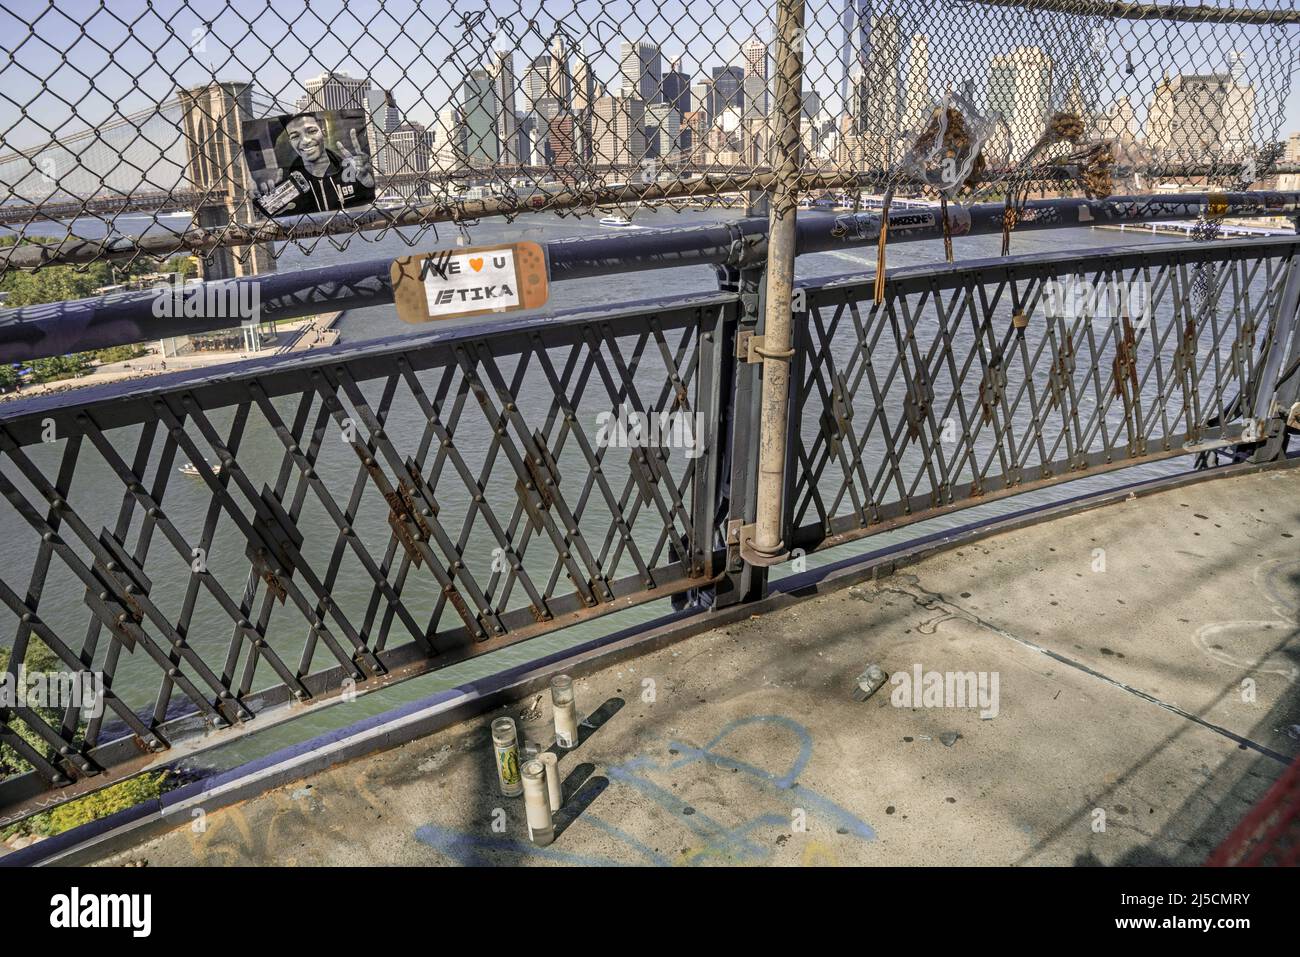 USA, New York, Sept. 19, 2019 Memorial for Desmond Daniel Amofah (Etika) on the Brooklyn Bridge on Sept. 19, 2019. Desmond Daniel Amofah (May 12, 1990 - c. June 19, 2019), better known by his online pseudonym Etika, was an American YouTuber, streamer and model. He was best known for his exaggerated reactions to Nintendo Direct presentations, many of which became popular internet memes. After several months in which Amofah showed signs of mental illness and threatened suicide multiple times, he disappeared on the evening of June 19, 2019, after uploading an apologetic video in which he Stock Photo